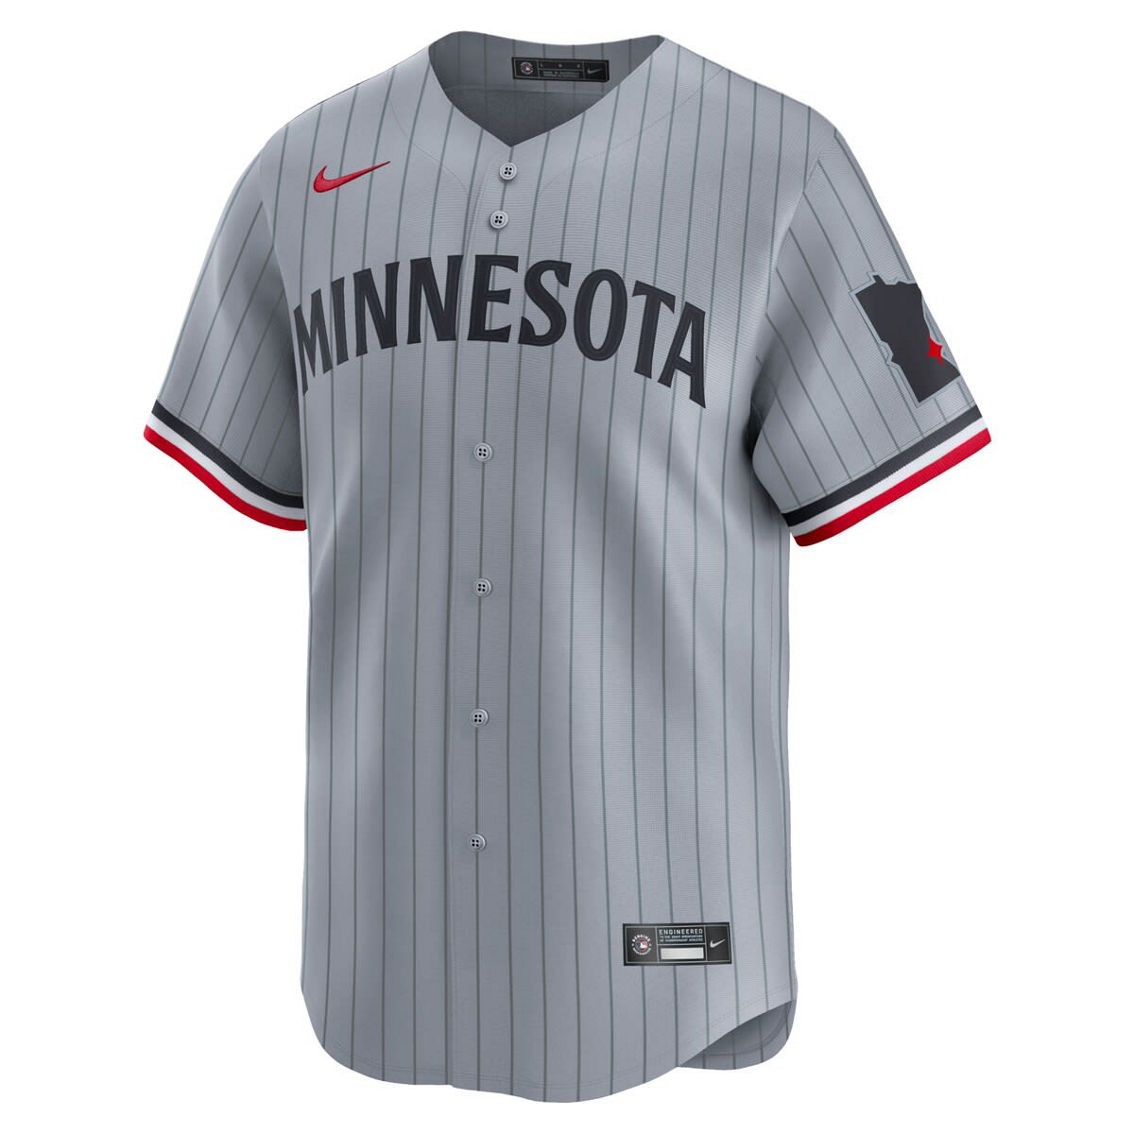 Nike Men's Gray Minnesota Twins Road Limited Jersey - Image 3 of 4